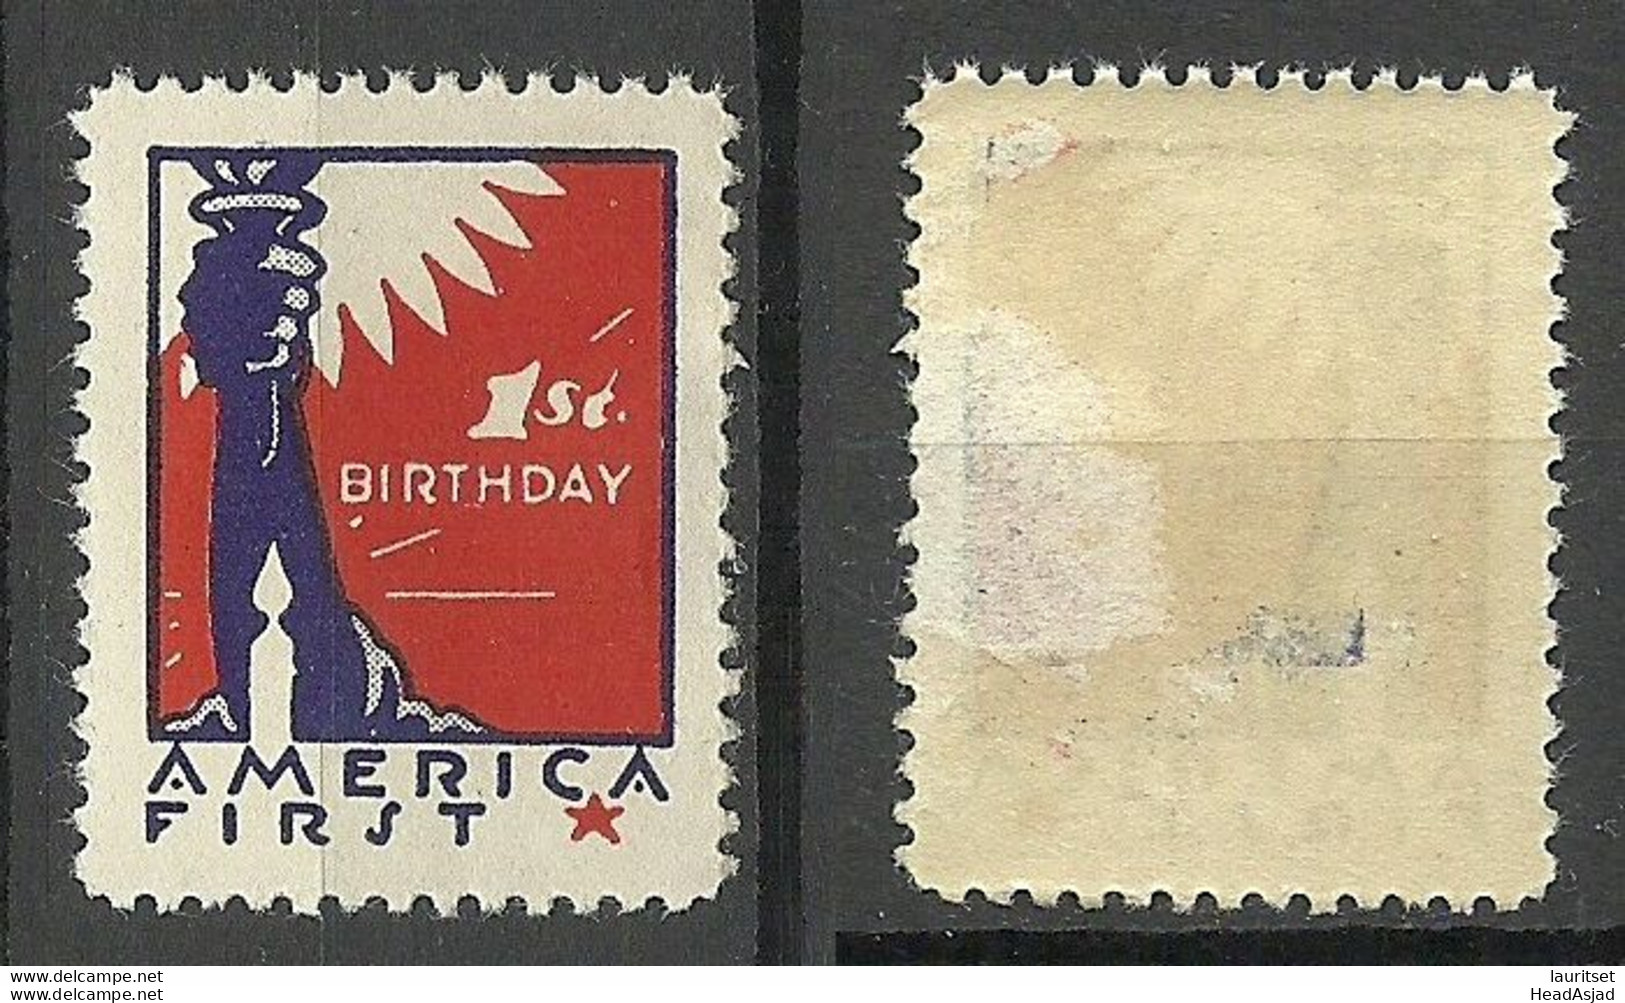 USA Patriotic Vignette America First Poster Stamp NB! Defect - Thinned Place! - Erinnophilie